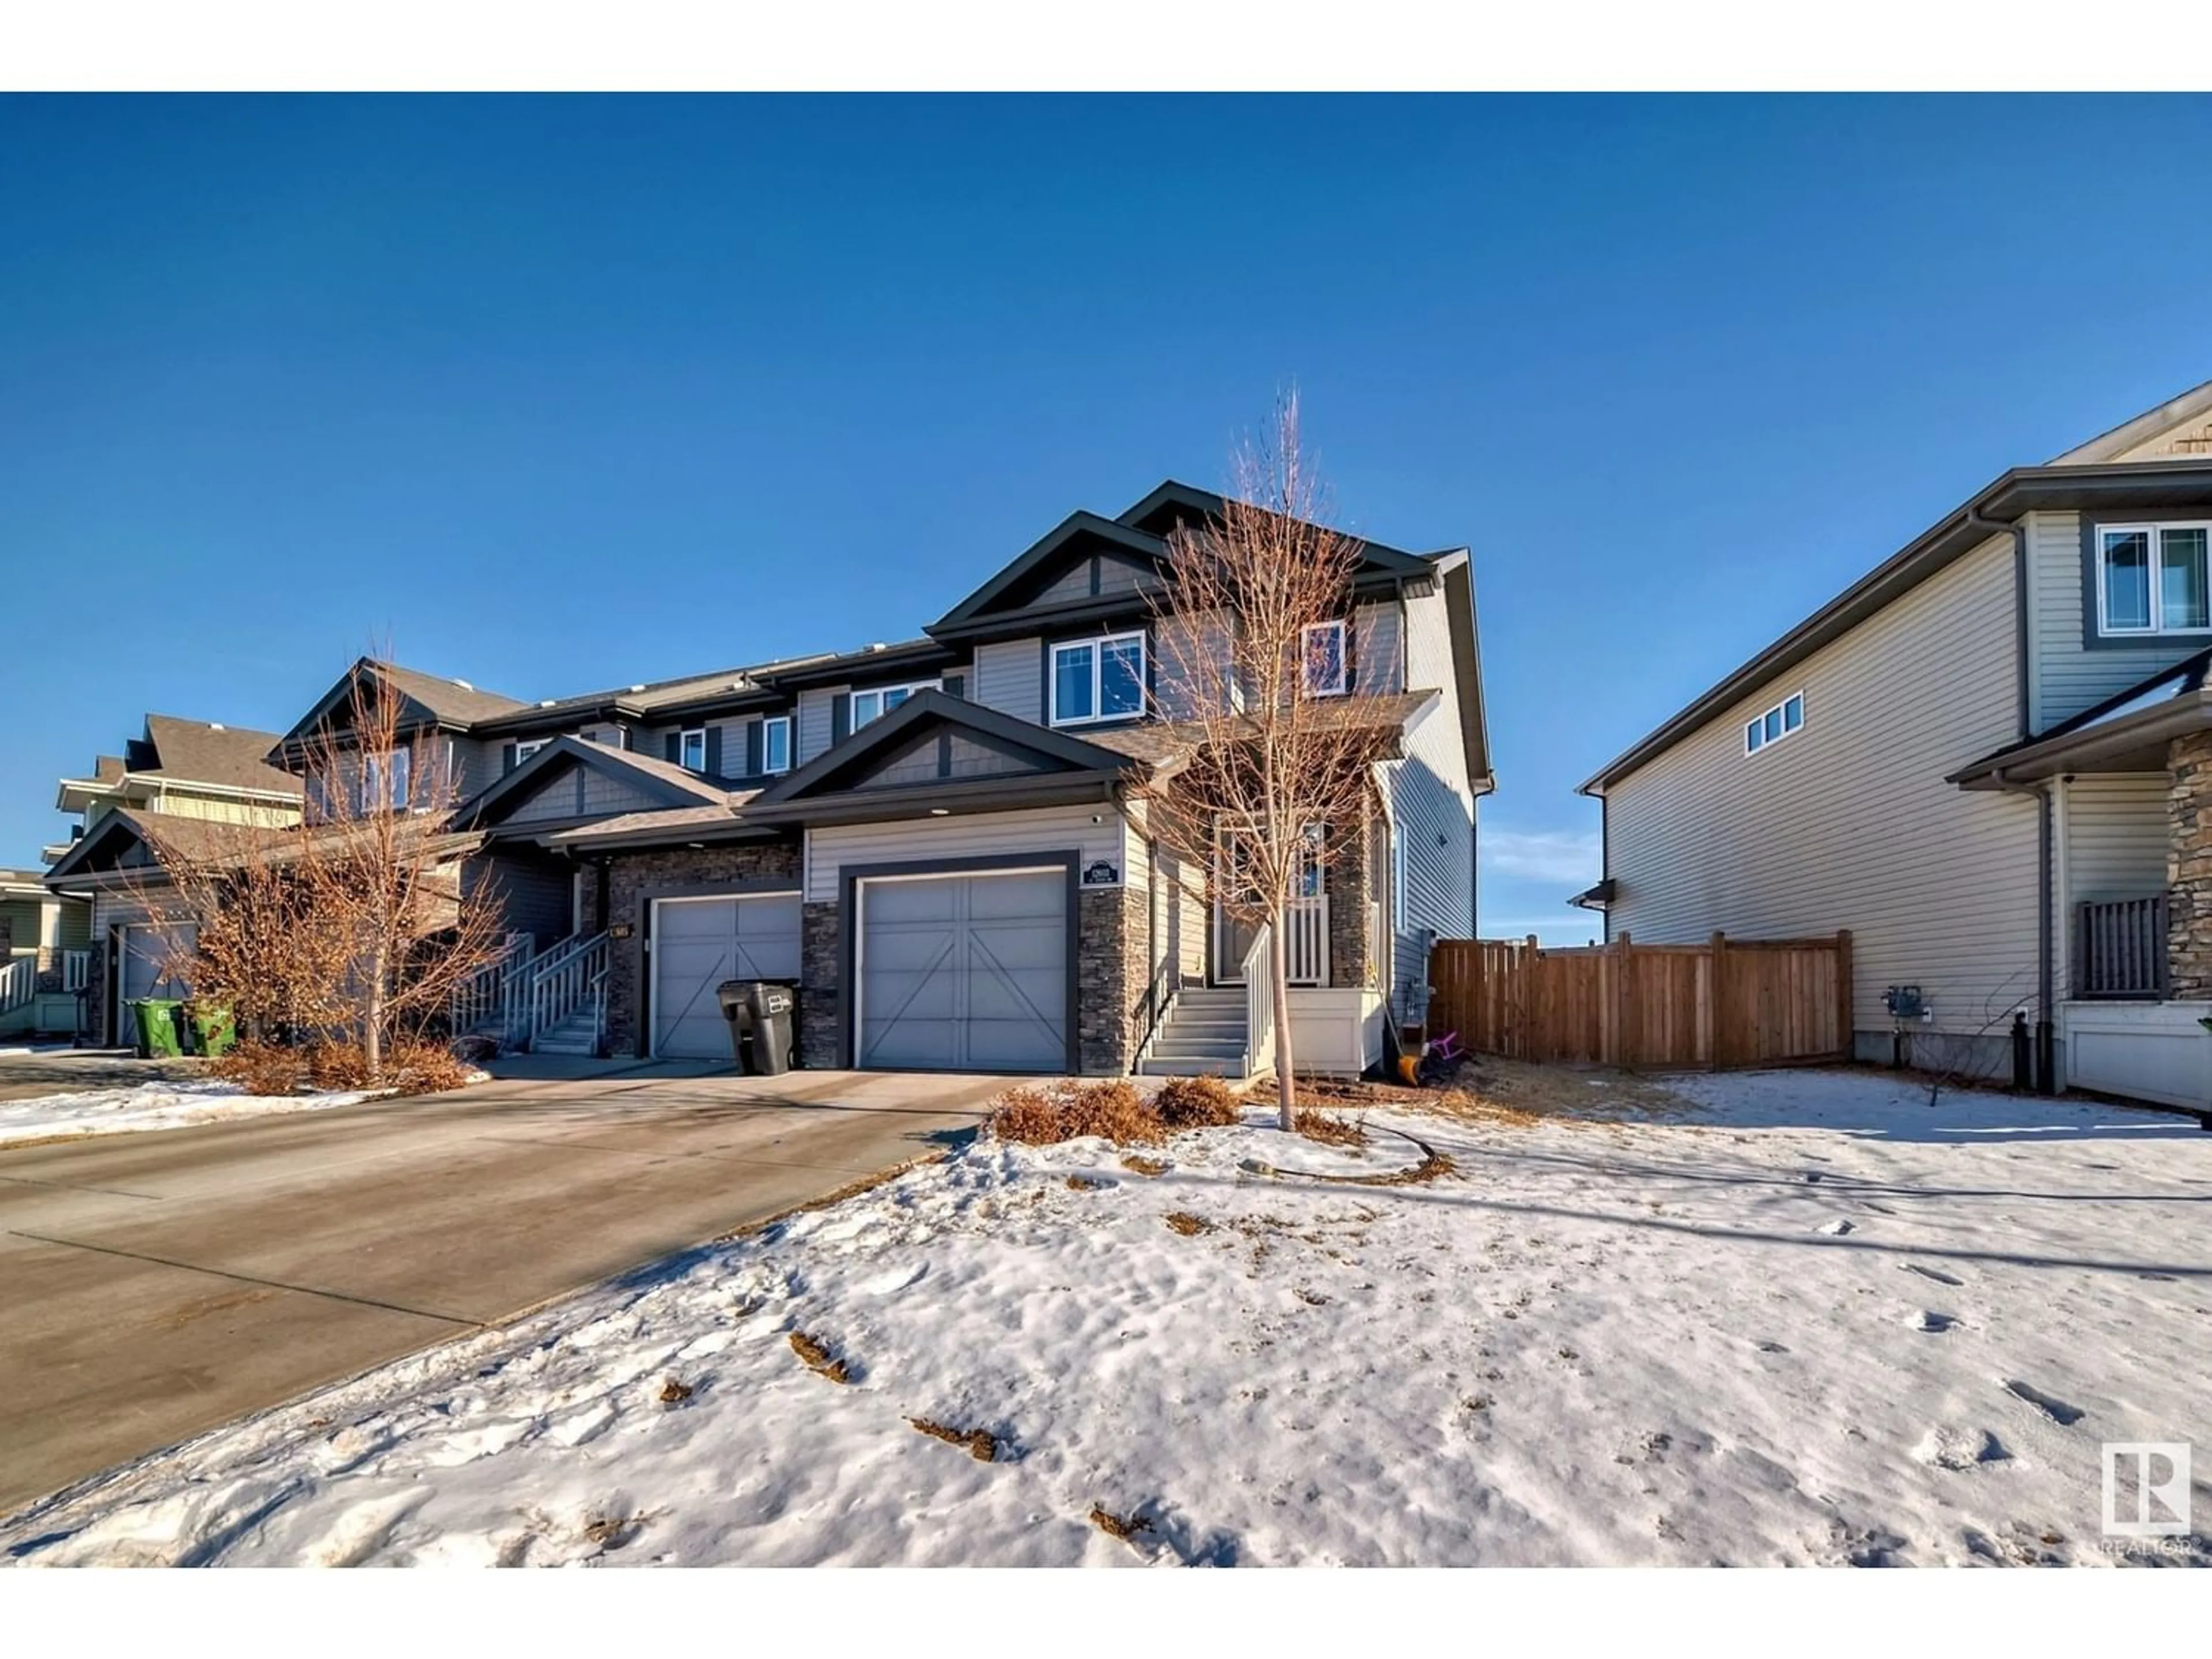 A pic from exterior of the house or condo for 12603 45 ST NW, Edmonton Alberta T5A1L3